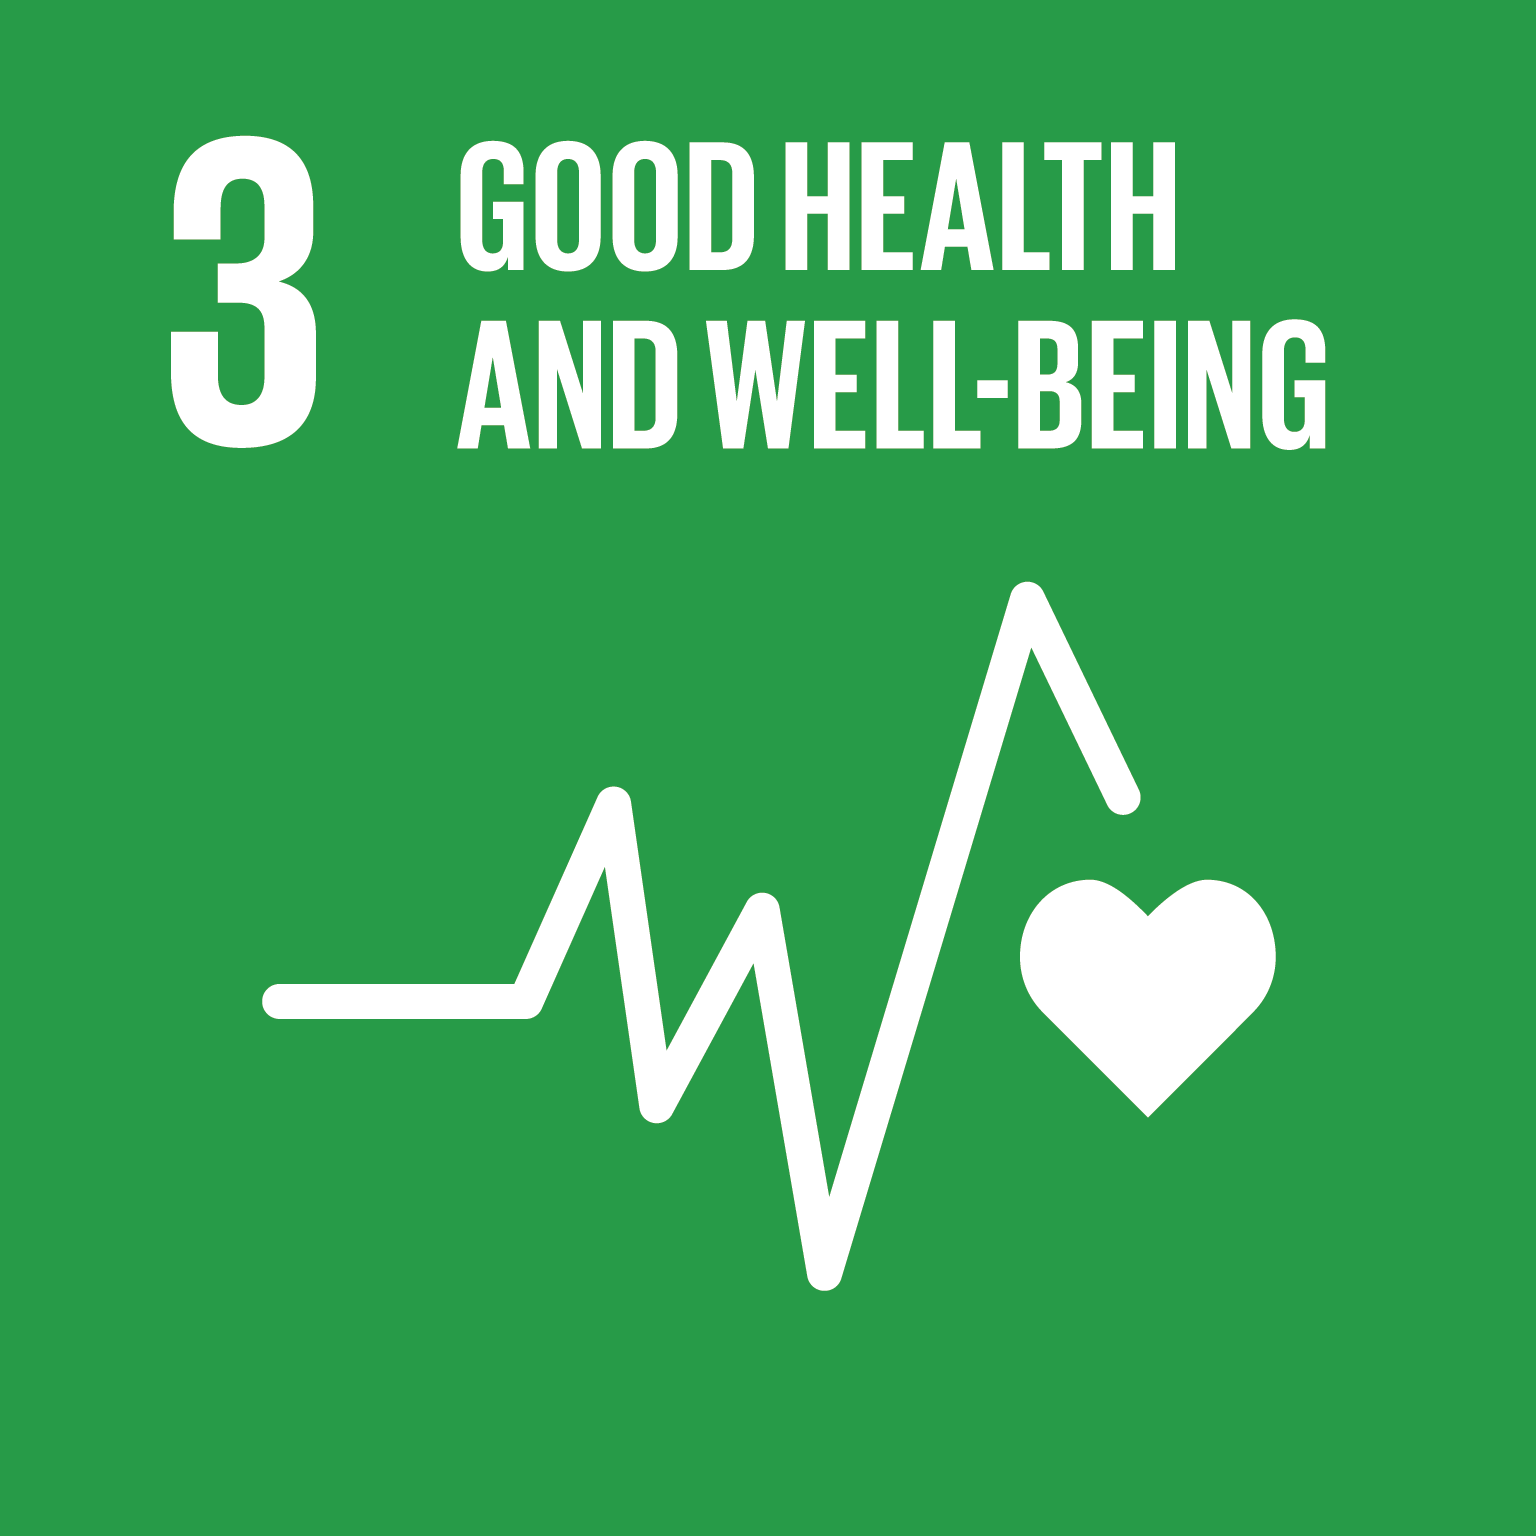 3: Good health and well-being